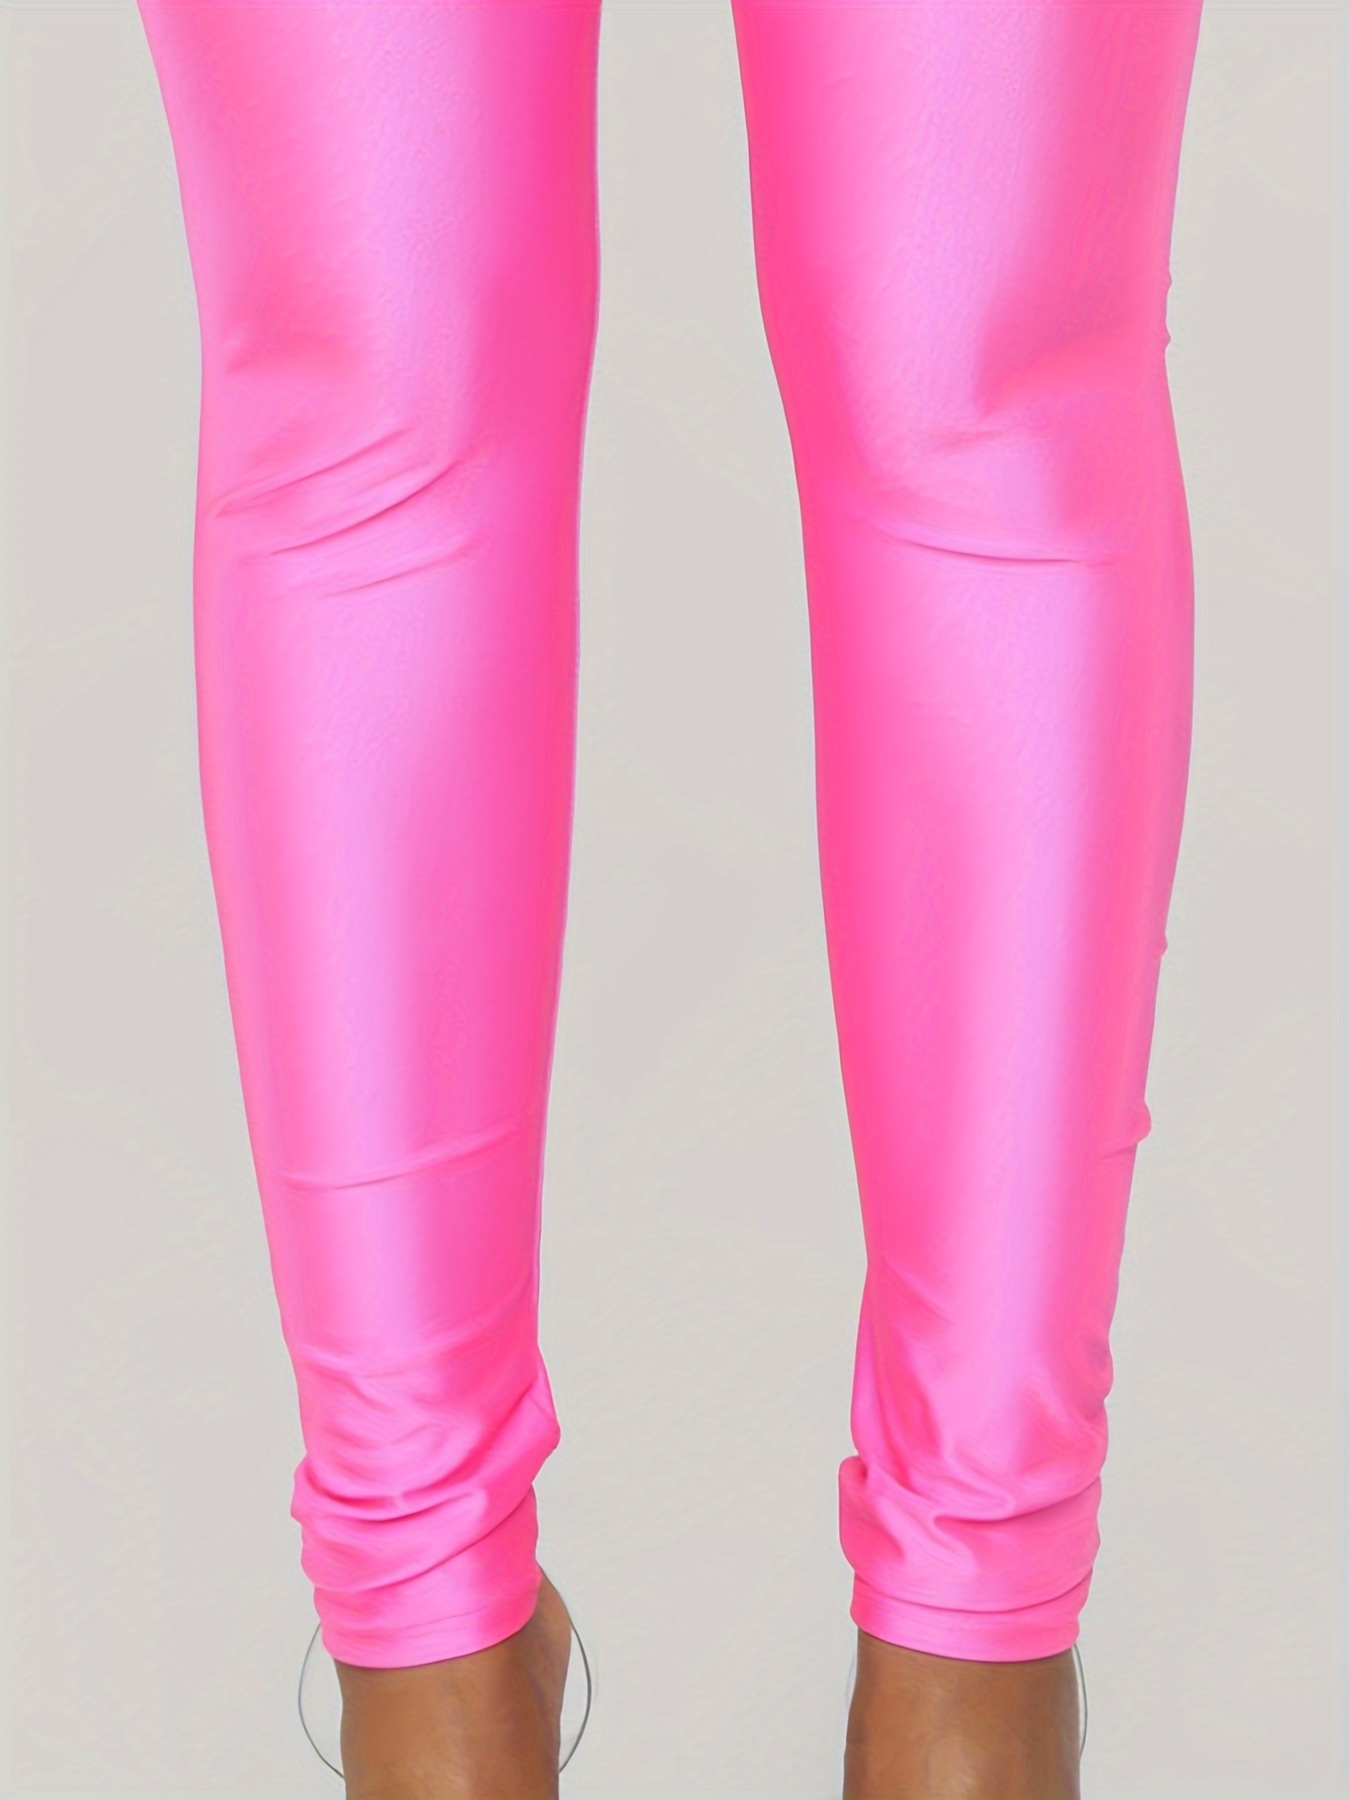 Women's Shiny Disco Leggings Combined with any shirt, blouse